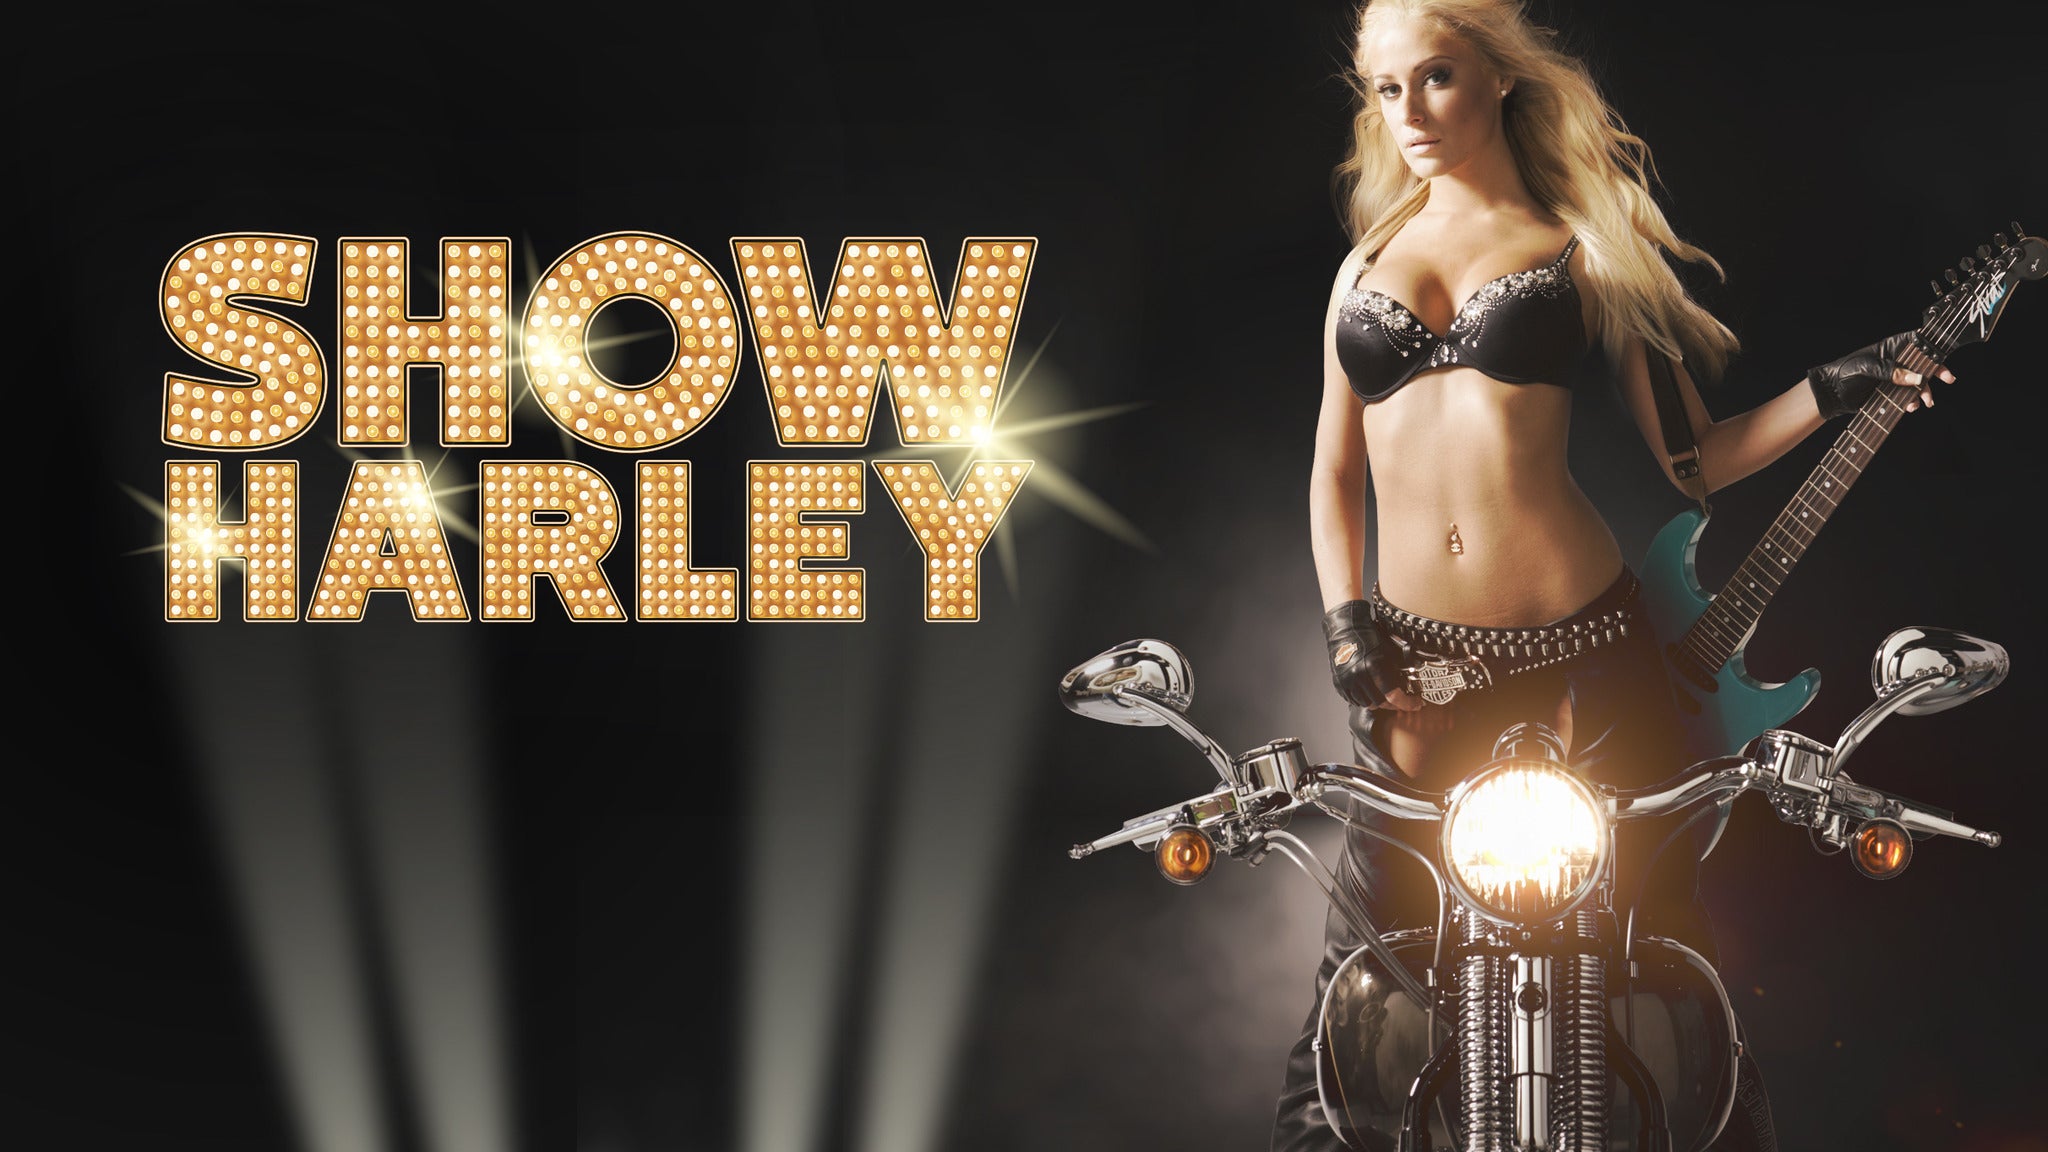 Le Show Harley 2020 in Montreal promo photo for Offre Tables Parterre presale offer code